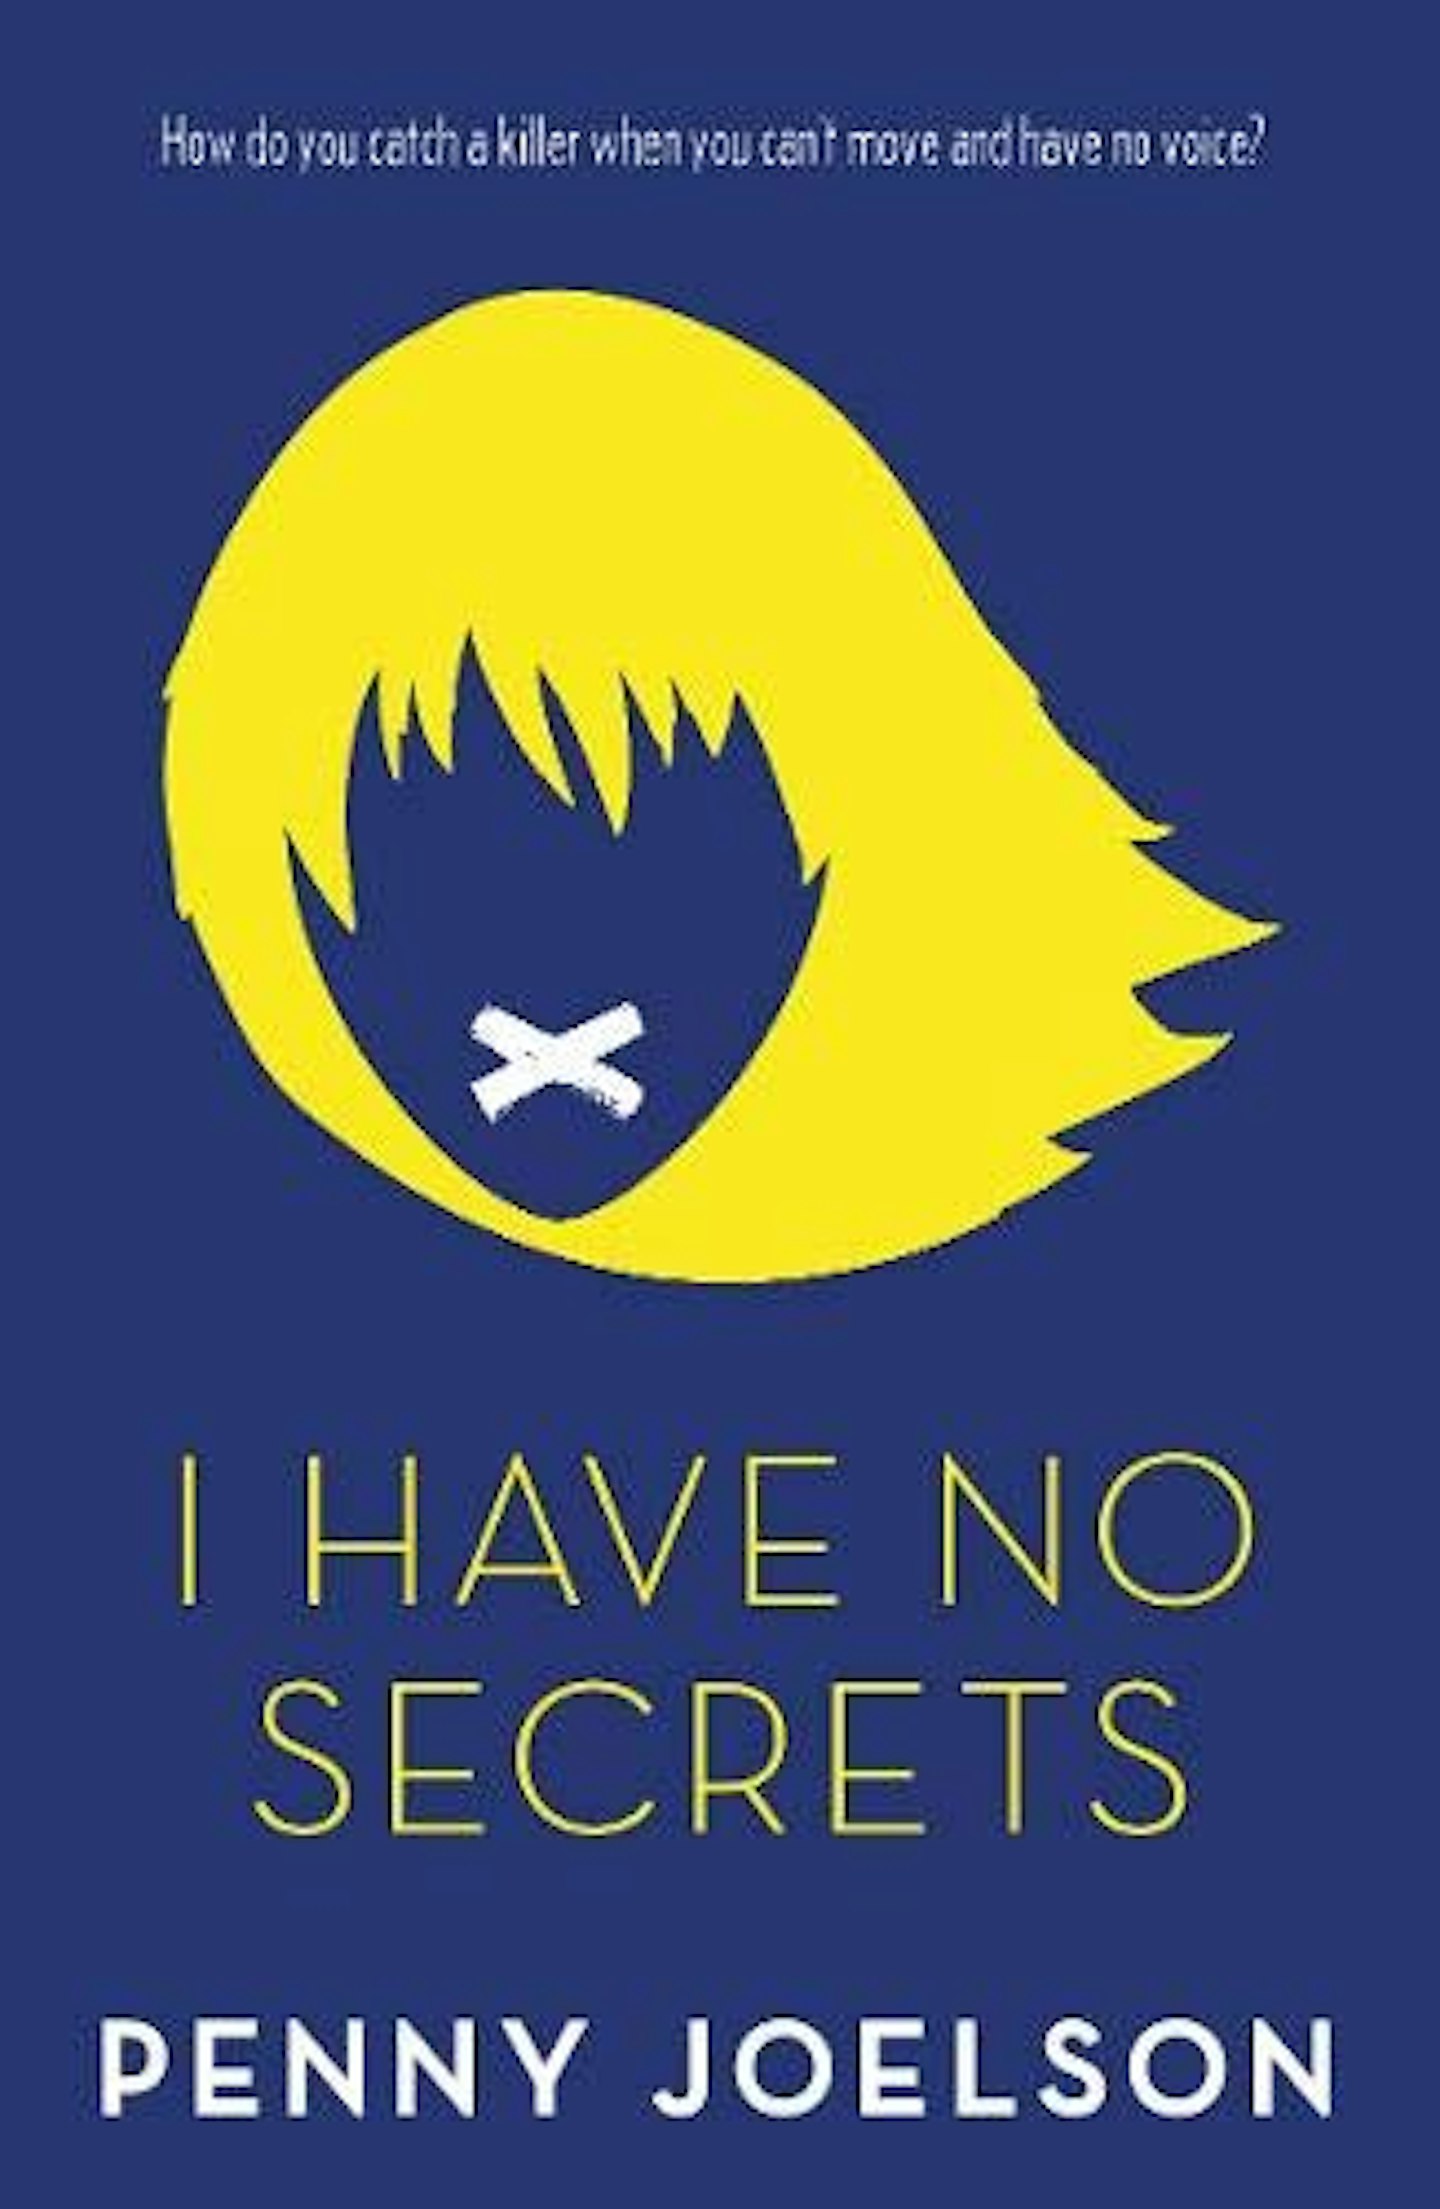 I Have No Secrets by Penny Joelson, 6.55